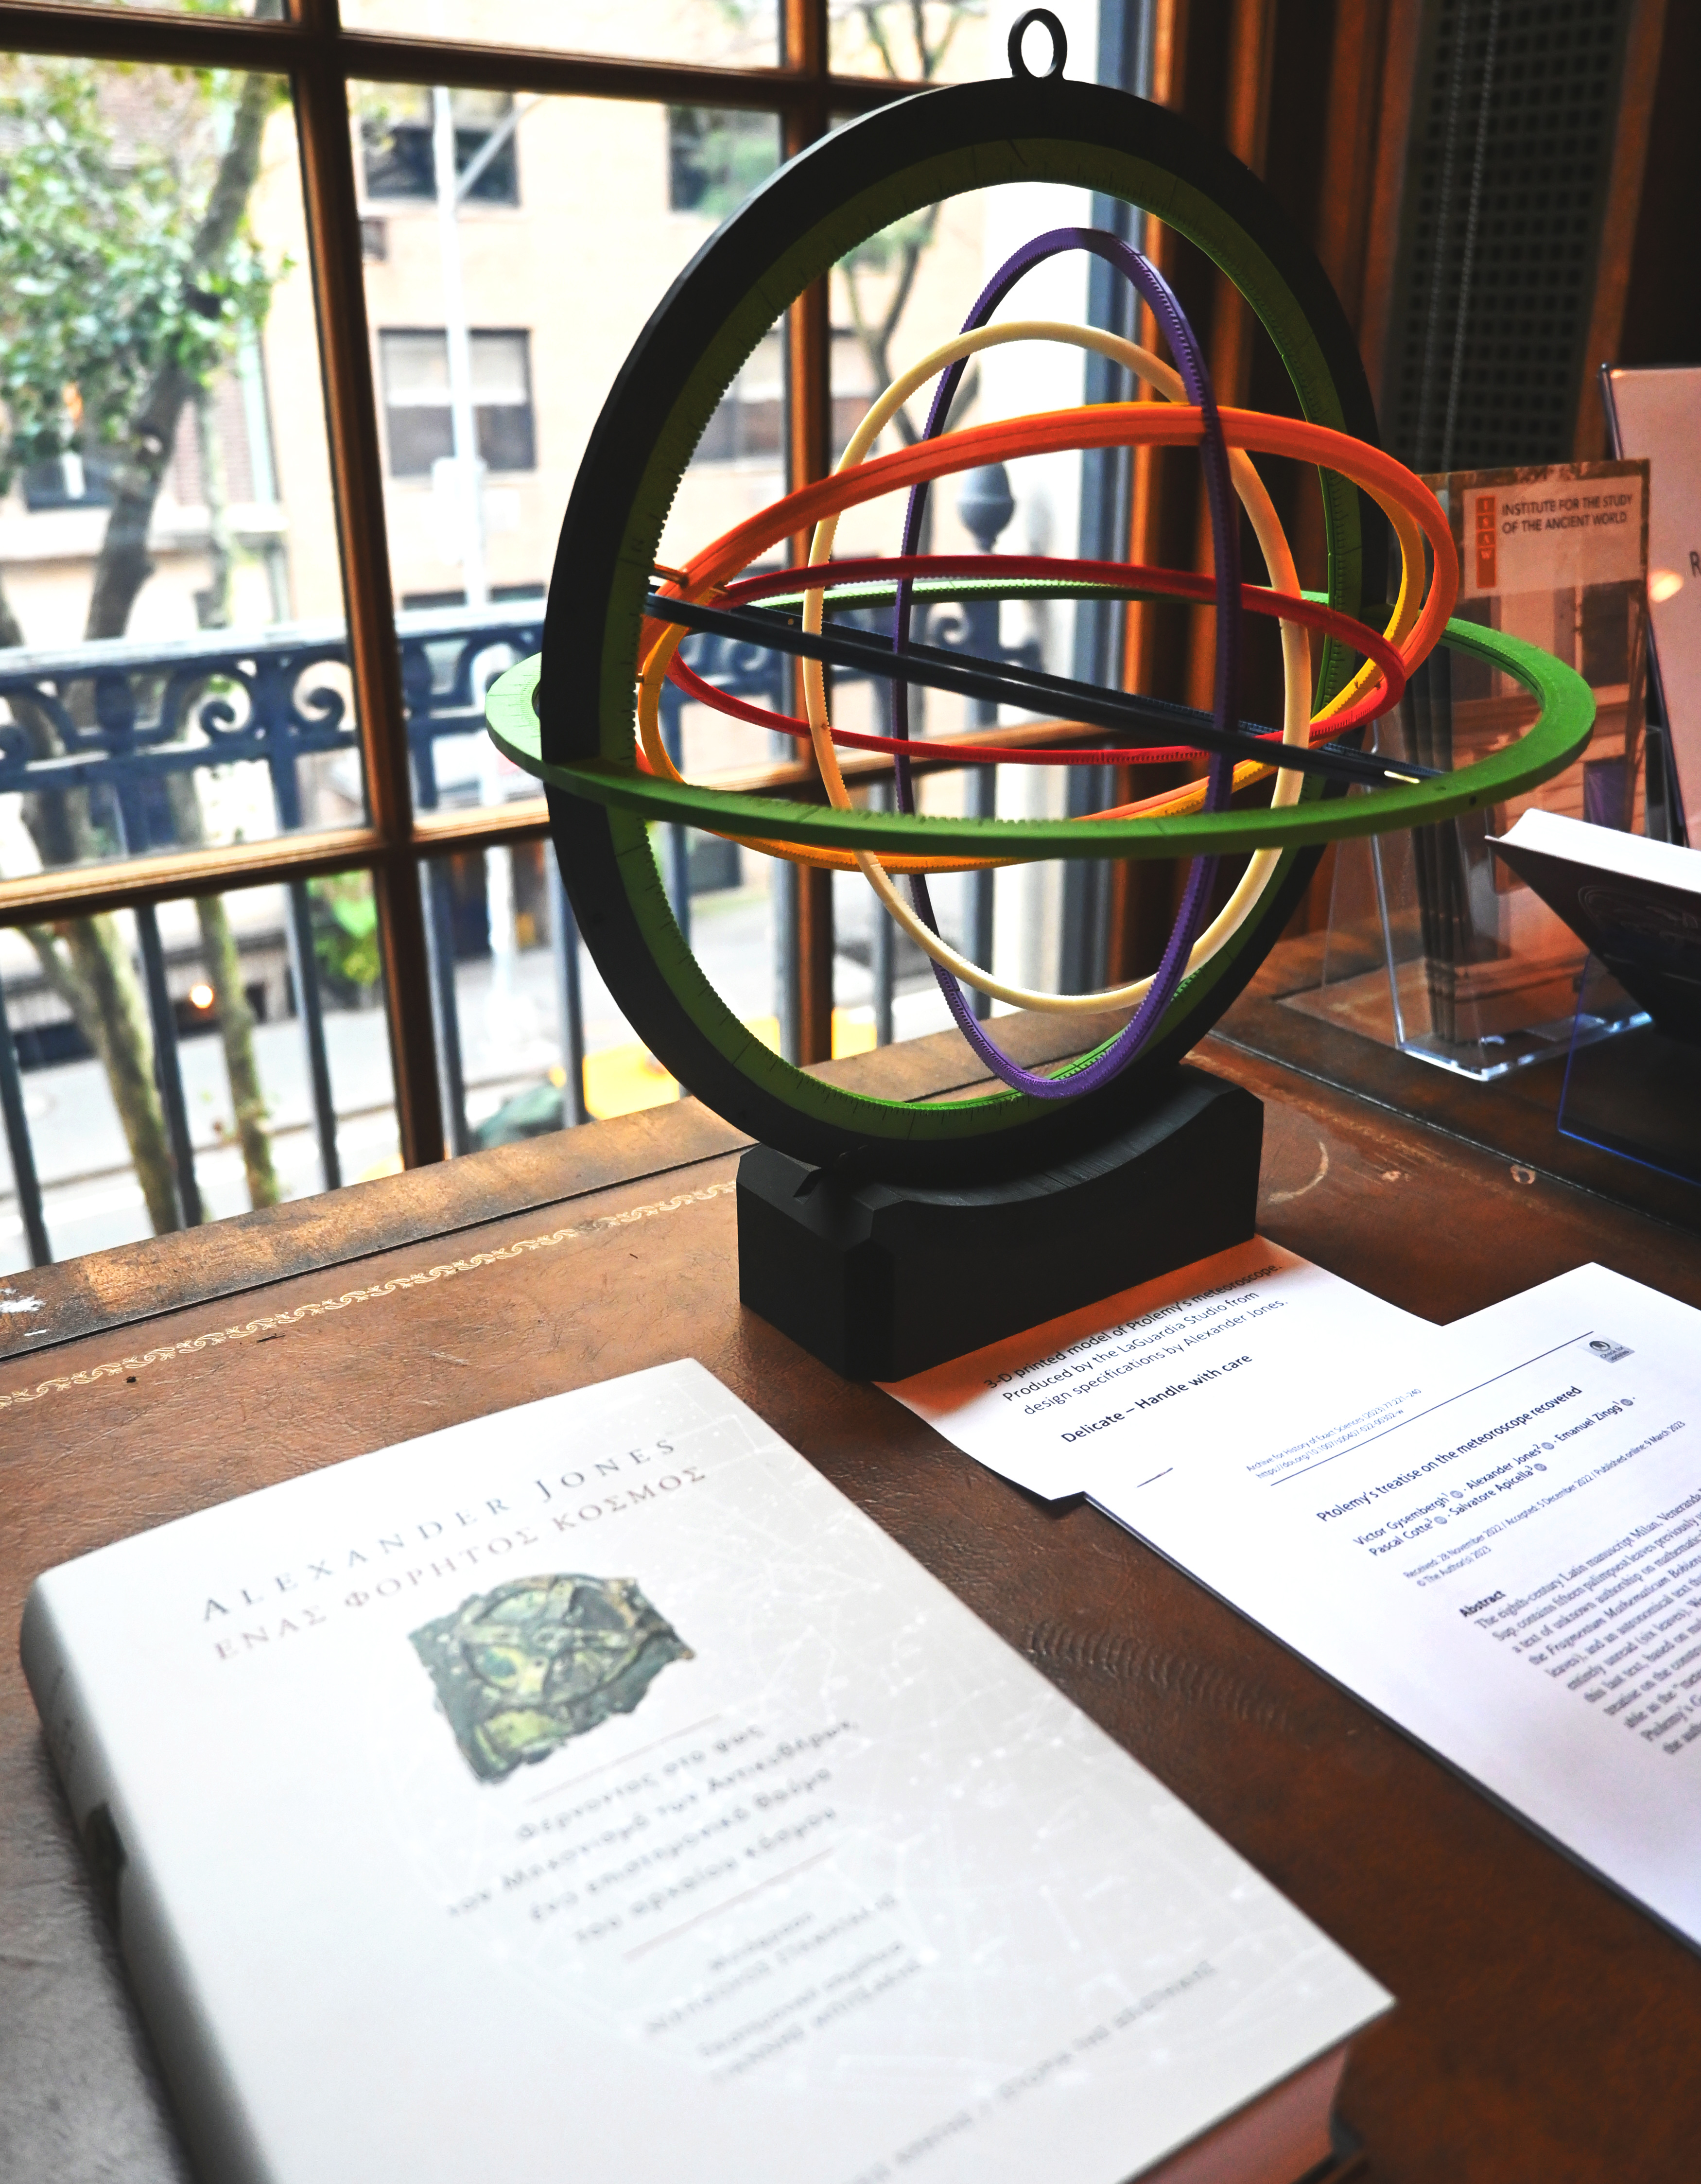 Book titled A Portable Cosmos written by Alexander Jones translated into Greek and displayed on a table next to a model of an ancient meteoroscope